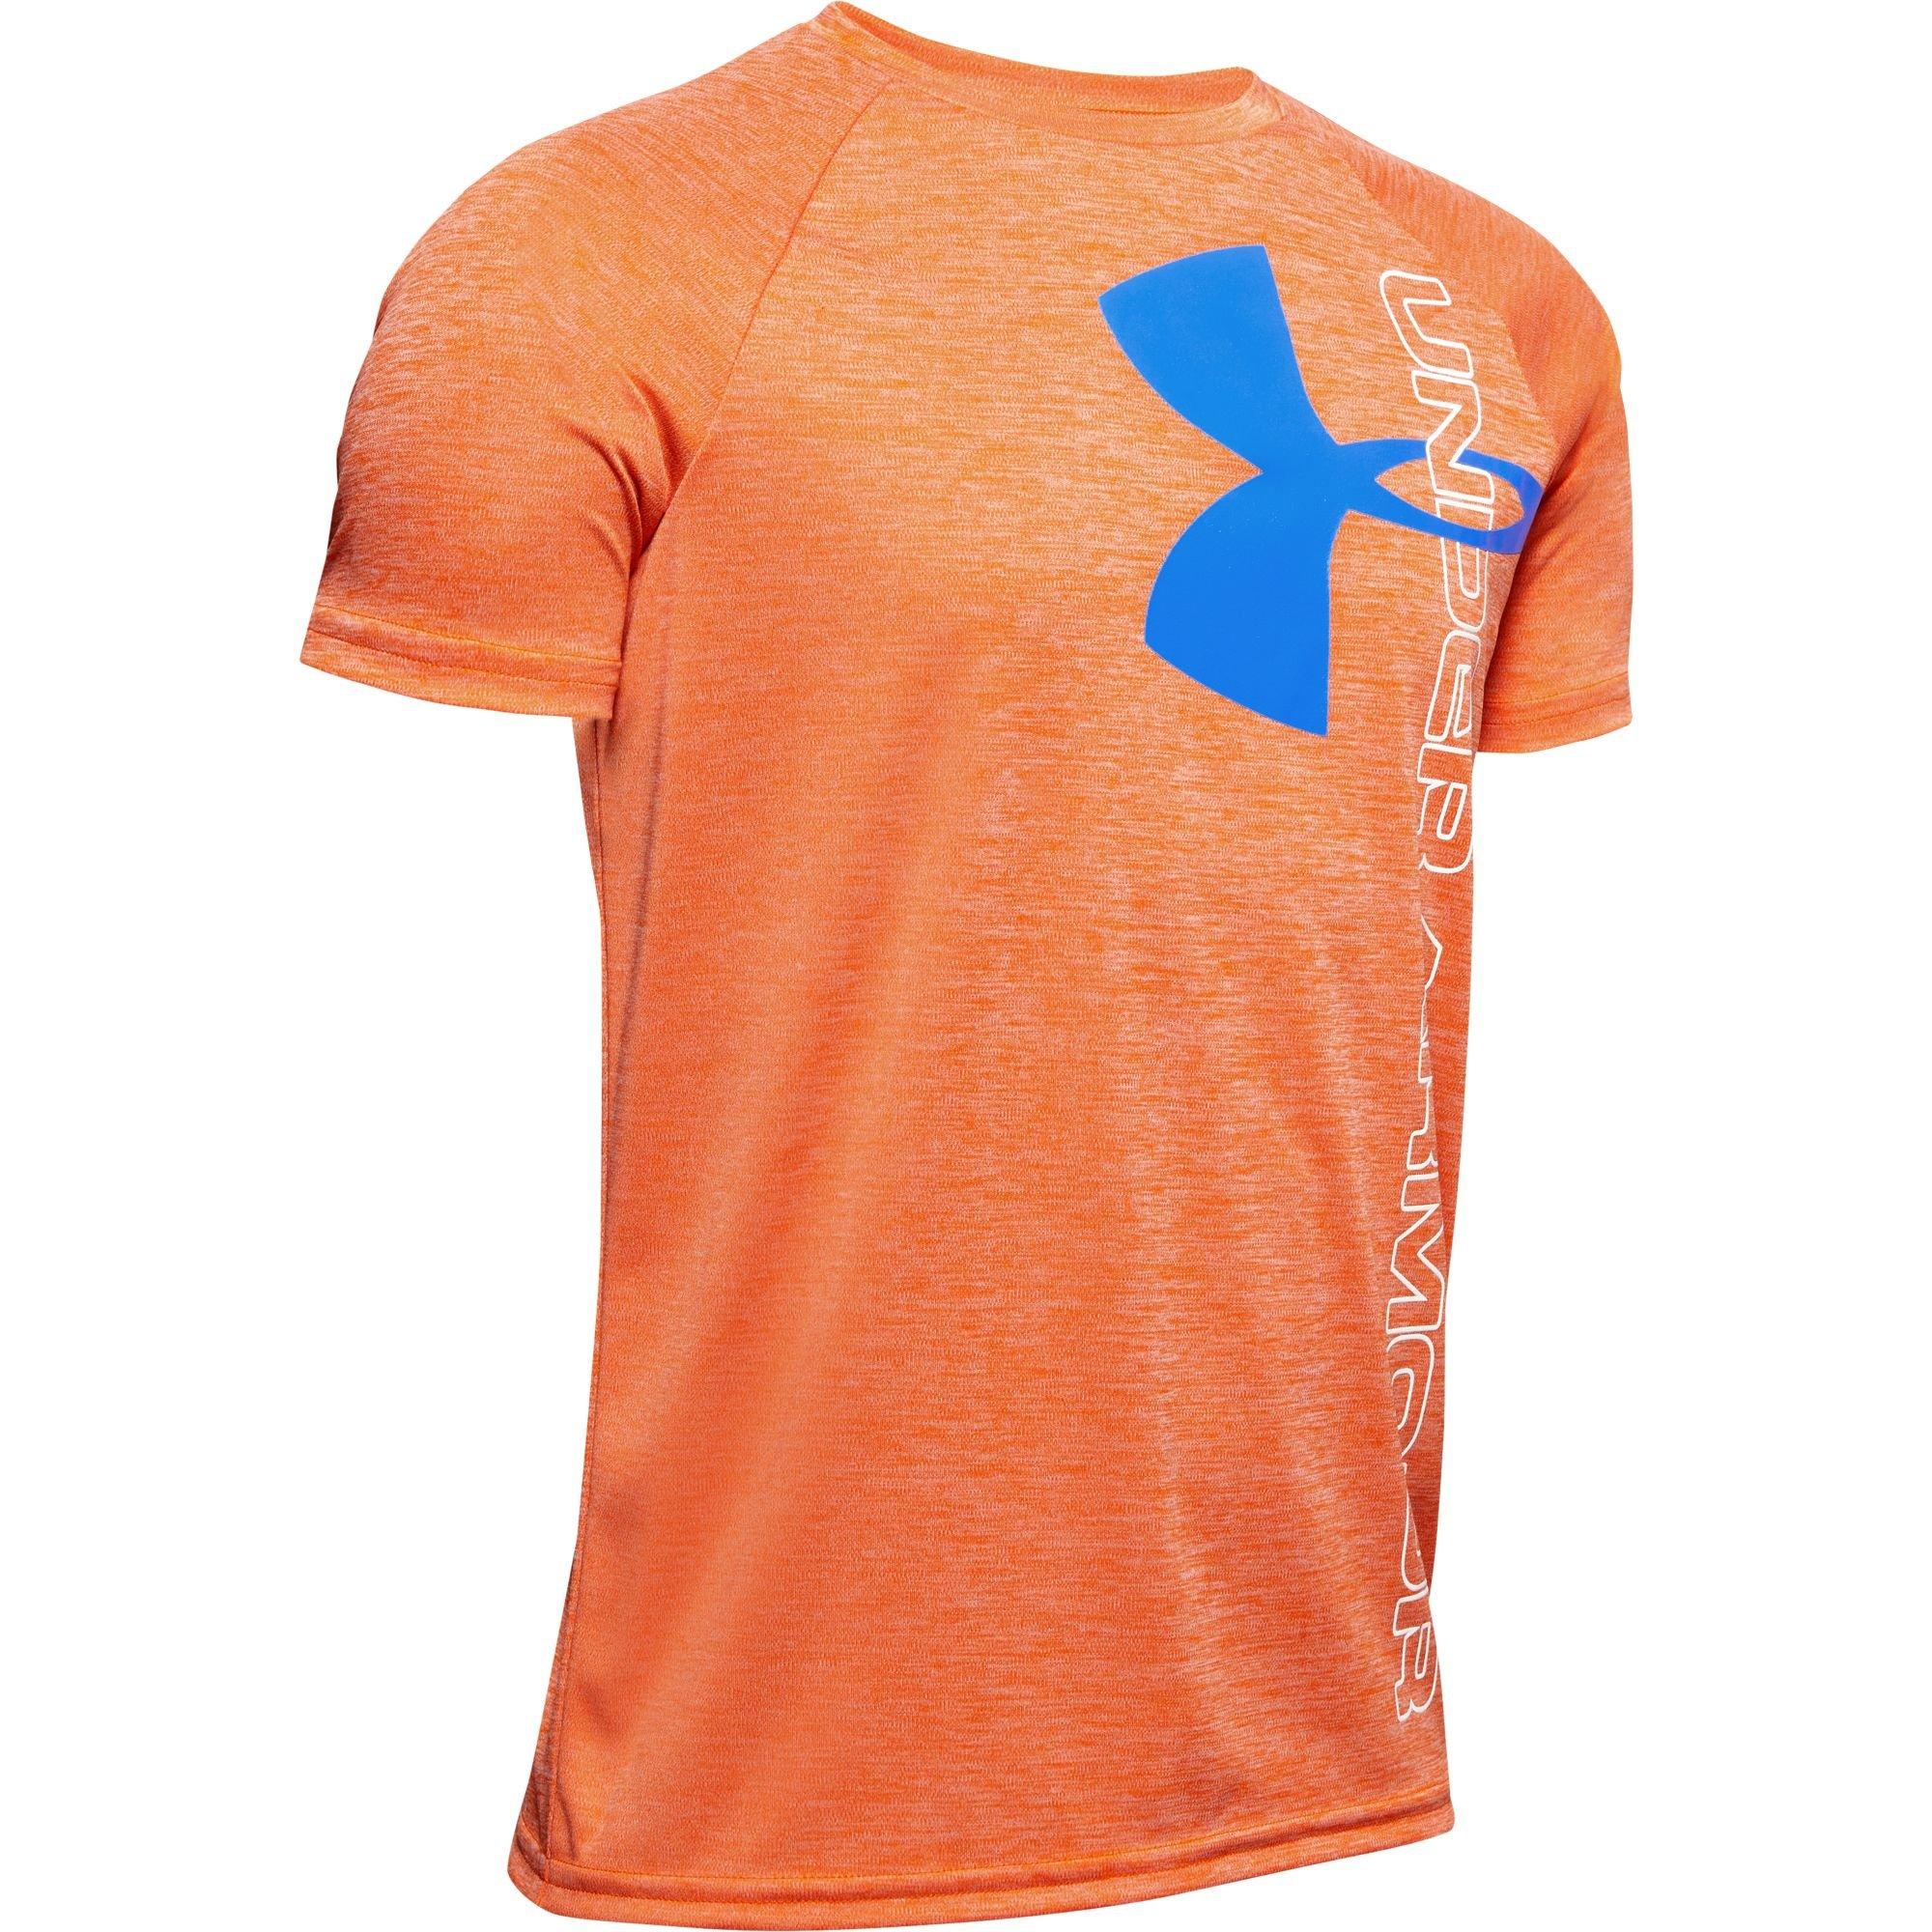 Details about   NWT UNDER ARMOUR Gray and Blue with Orange LOGO Heat Gear s/s SHIRT Toddler 2T